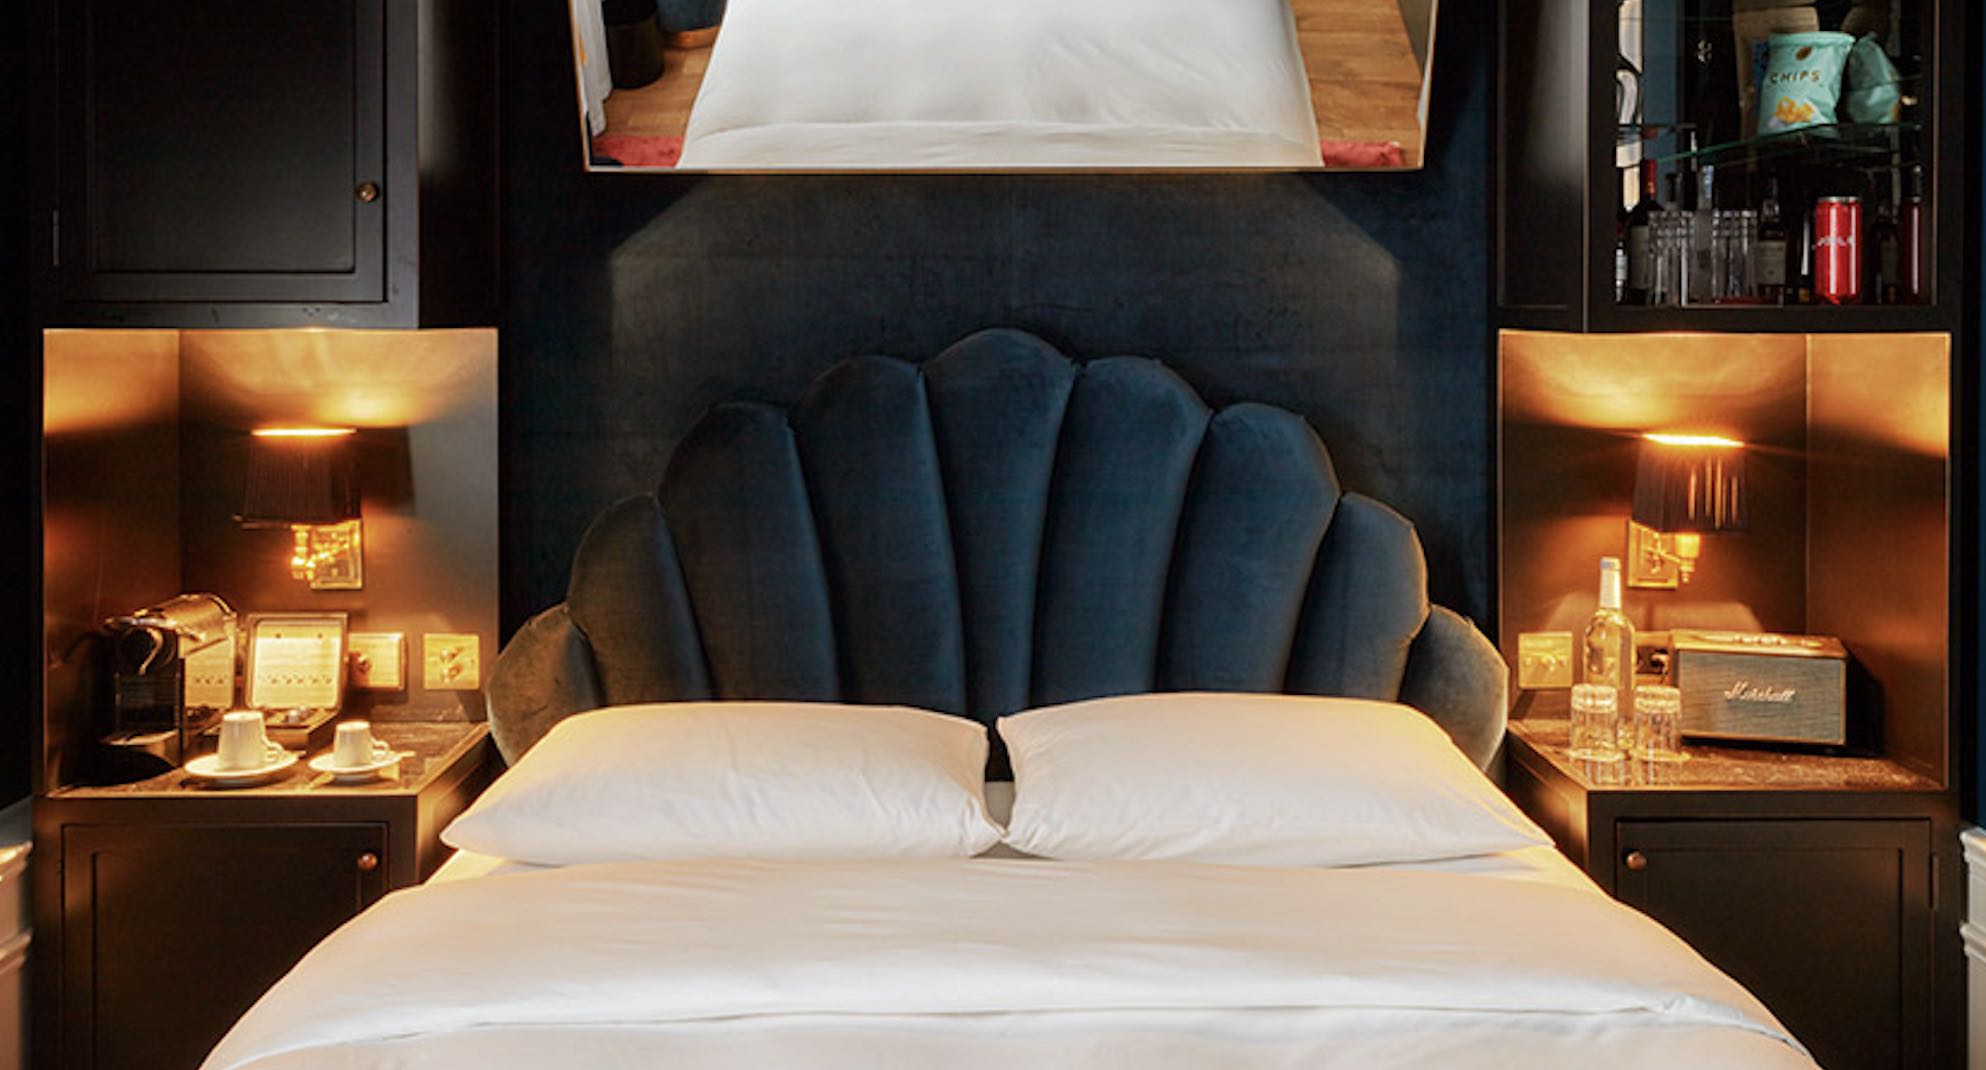 Provocateur Hotel is one of the top boutique hotels in berlin, shown here with classy king bed room